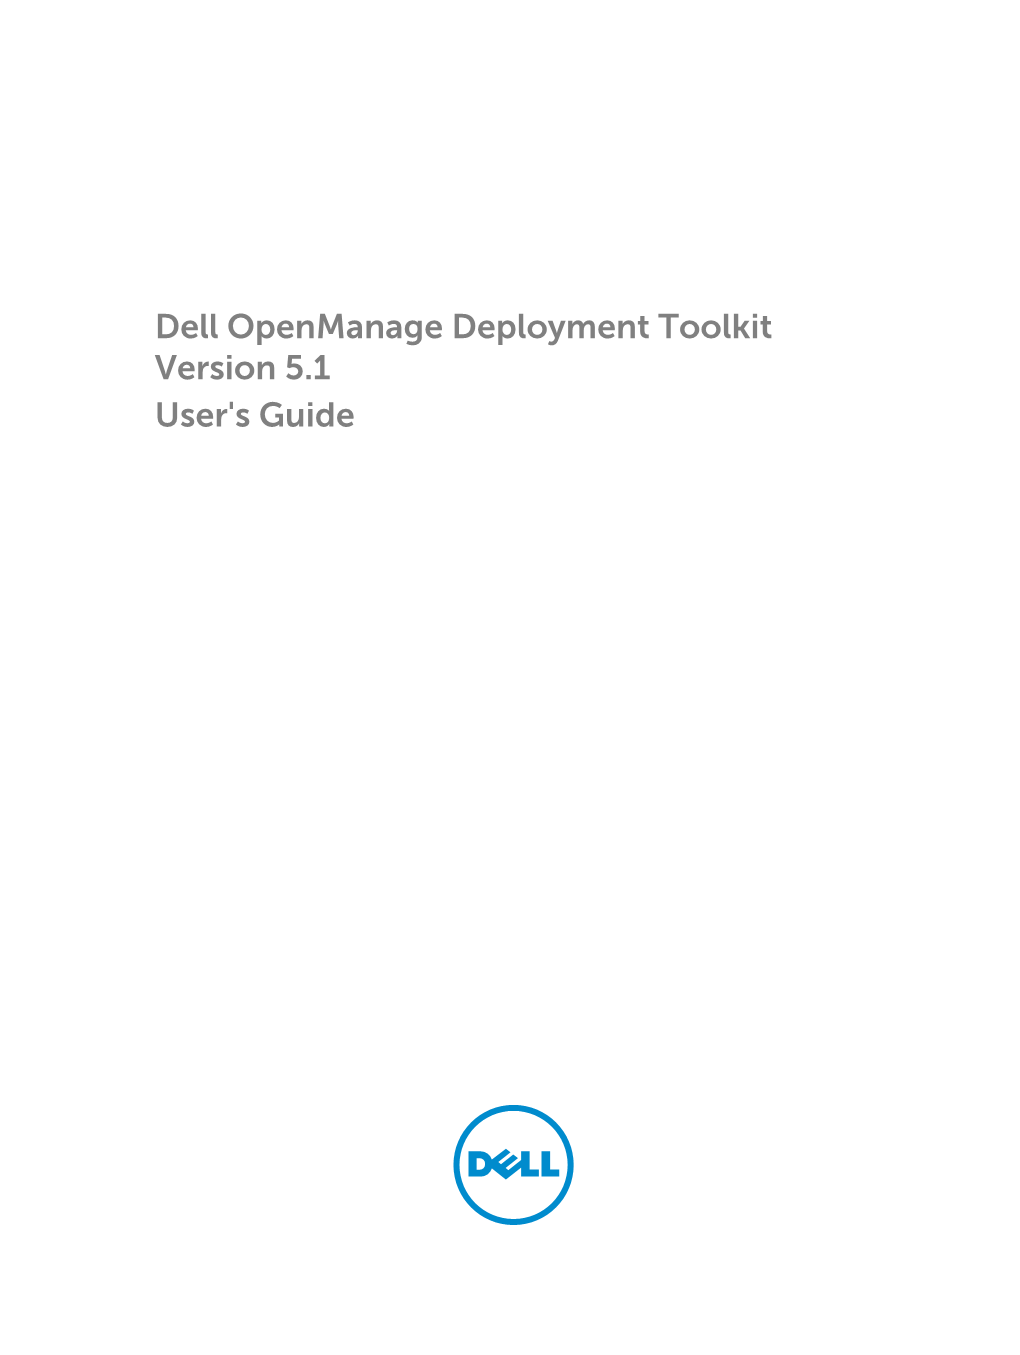 Dell Openmanage Deployment Toolkit Version 5.1 User's Guide Notes, Cautions, and Warnings